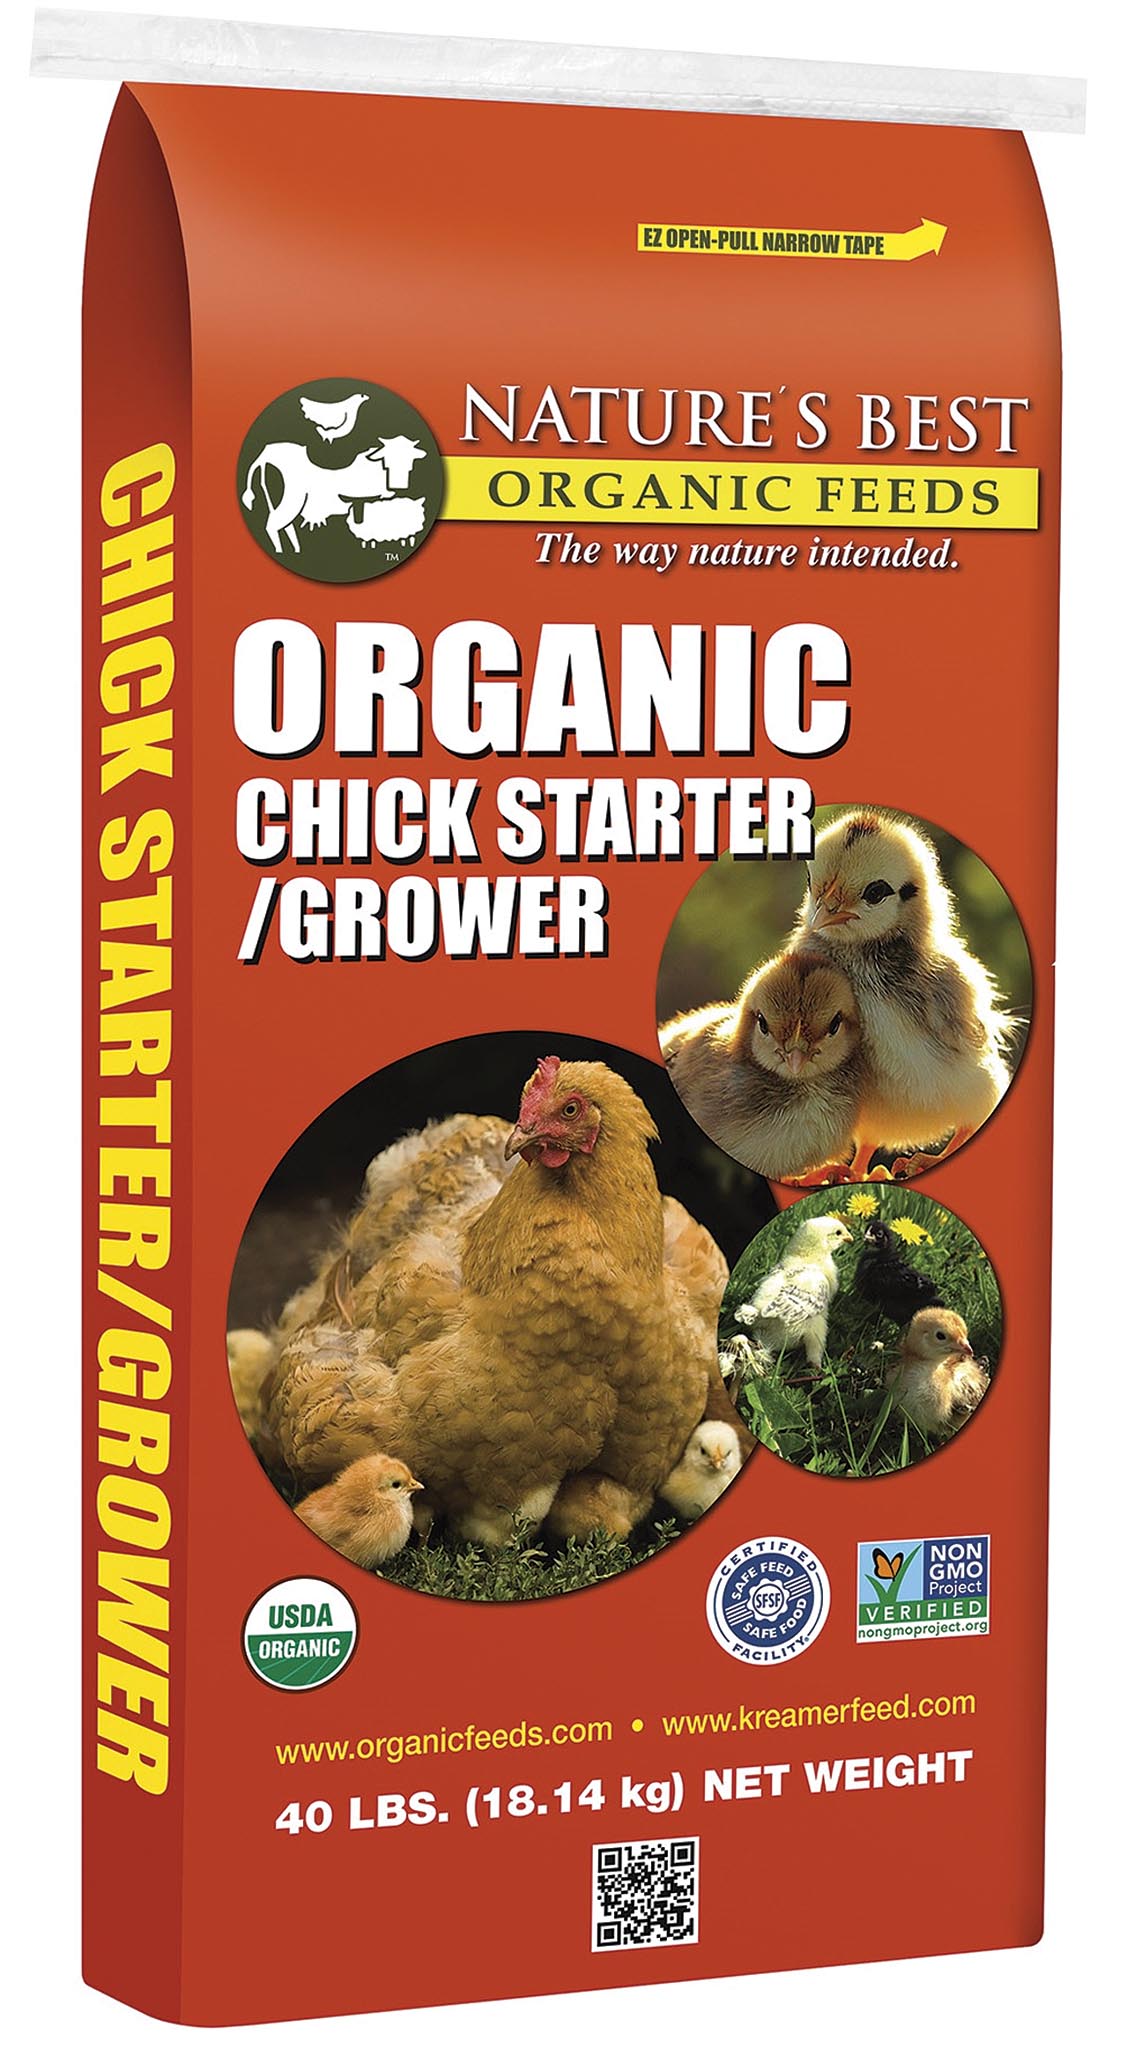 Image of a bag of starter/grower chick feed.